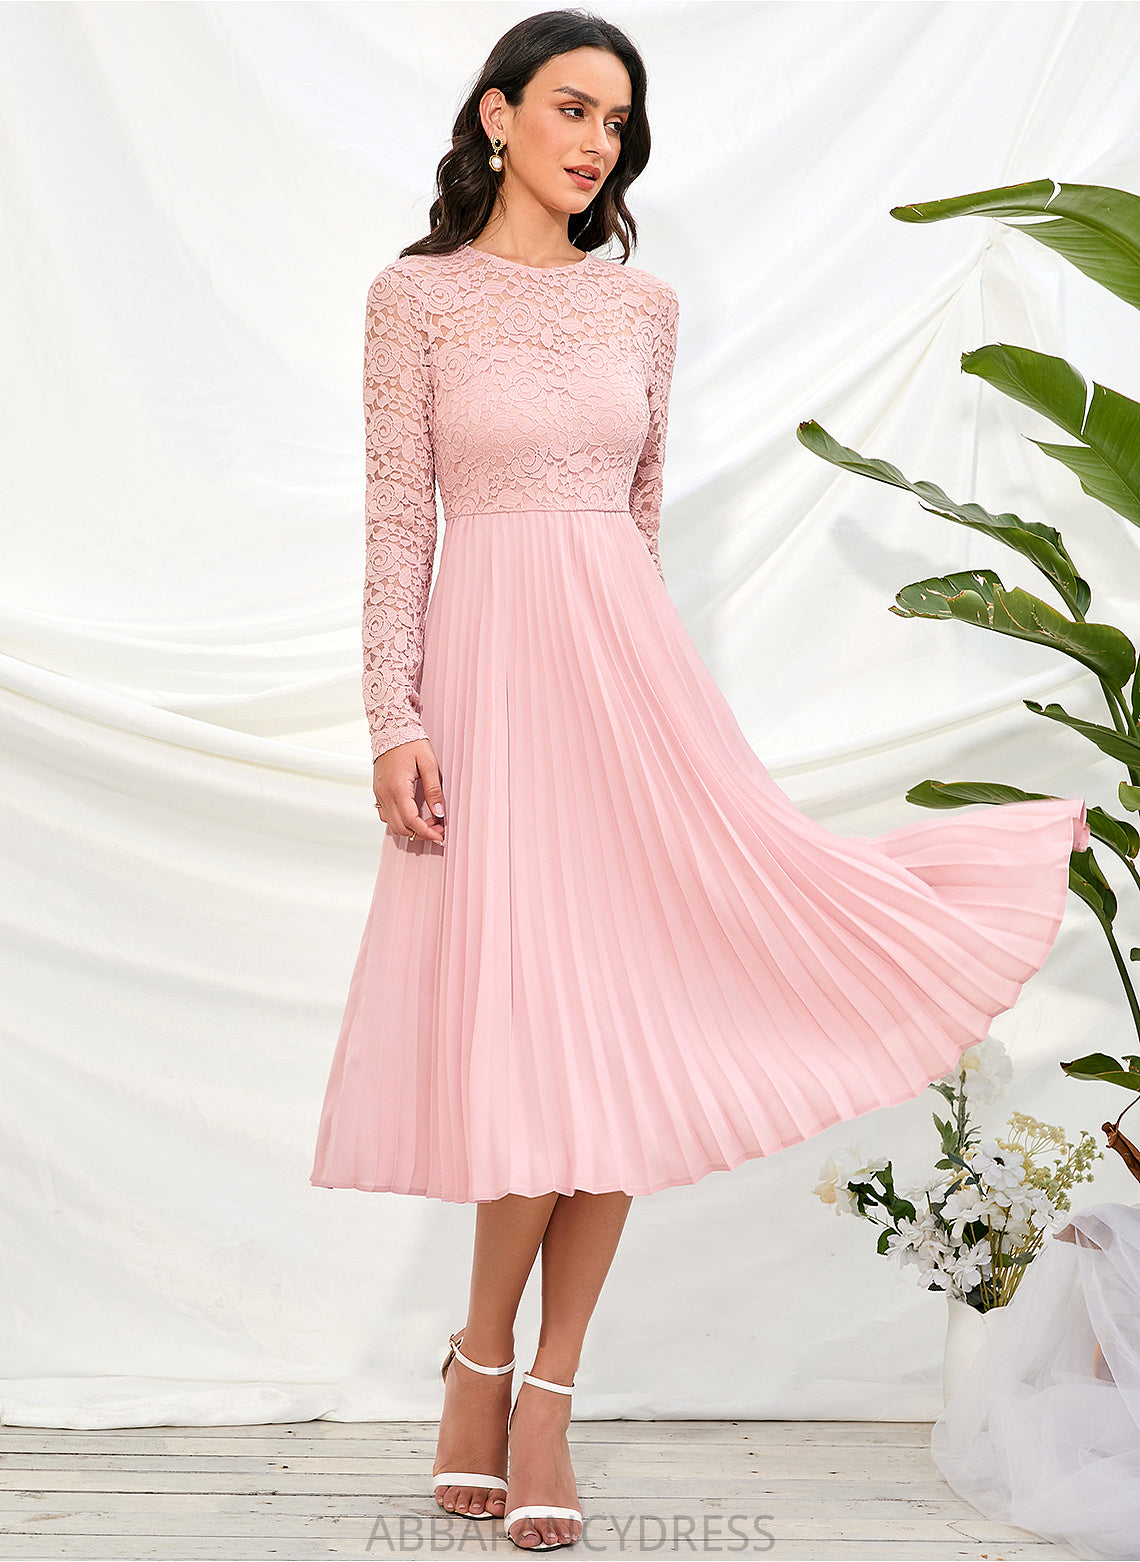 Fabric A-Line Length Sleeve Knee-Length Silhouette Straps Lace Sleeves Gwendolyn Spaghetti Staps Floor Length